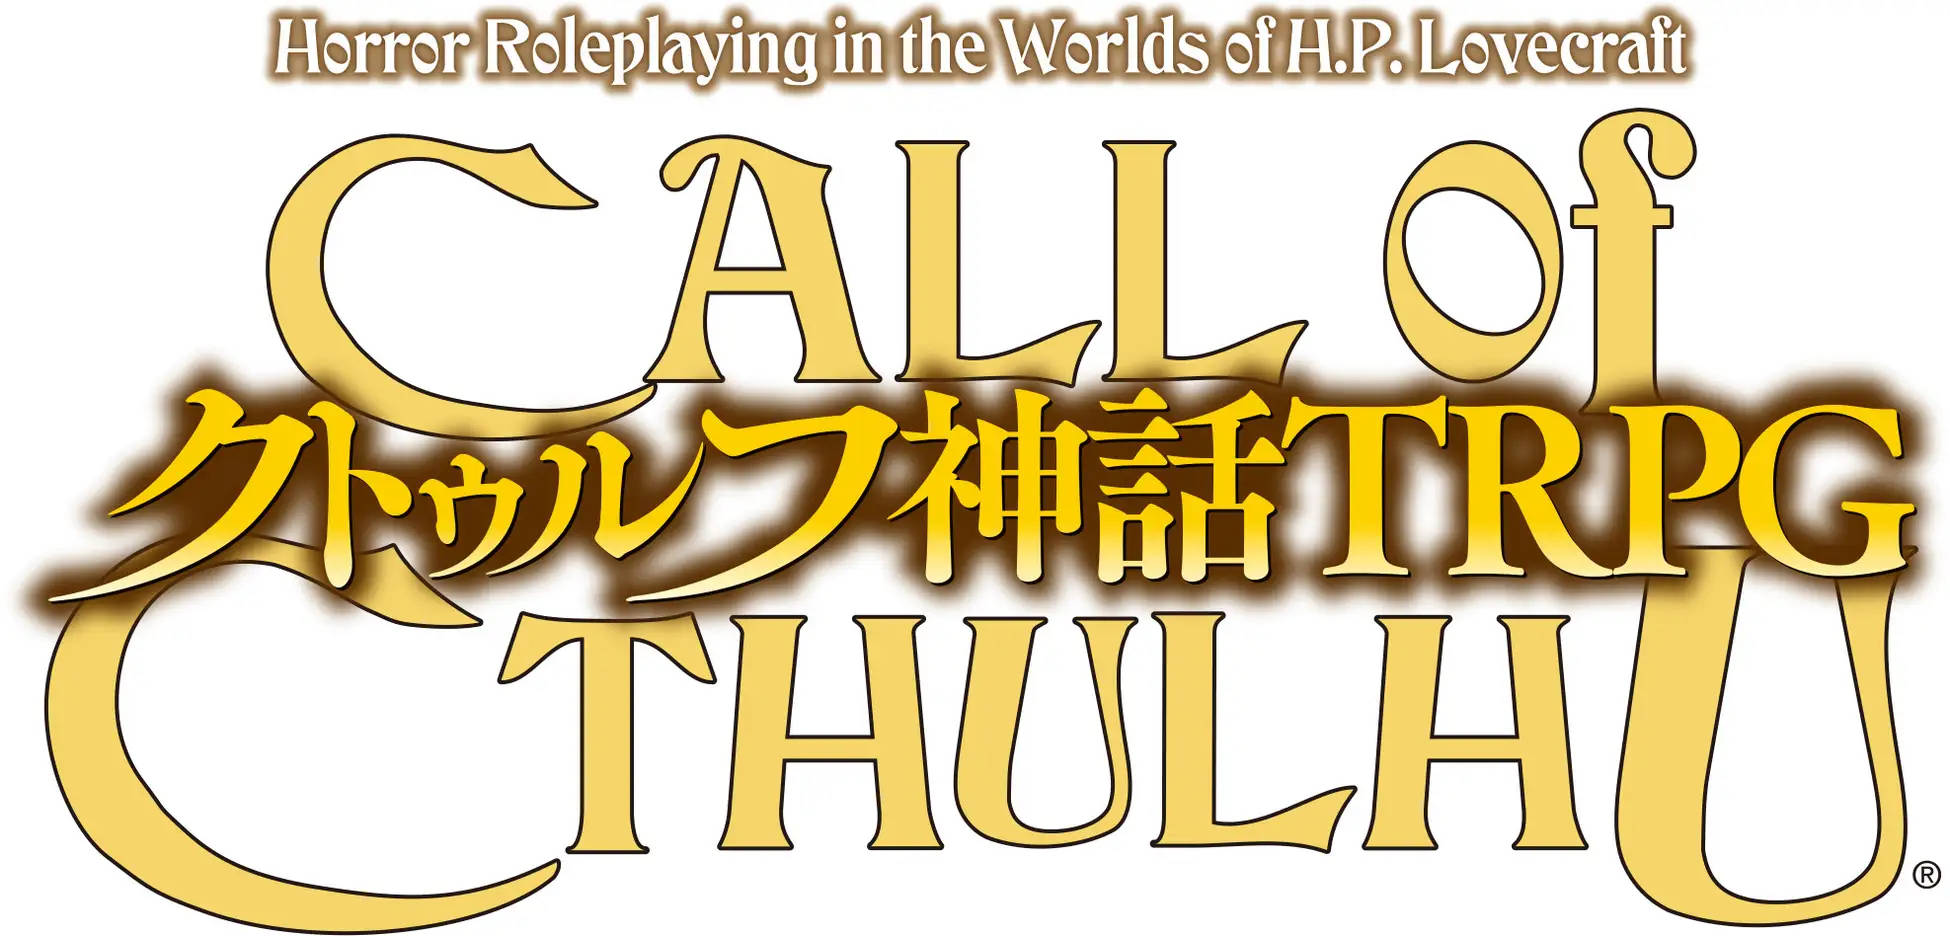 A Call of Cthulhu TRPG rulebook iOS app has been announced for Japan